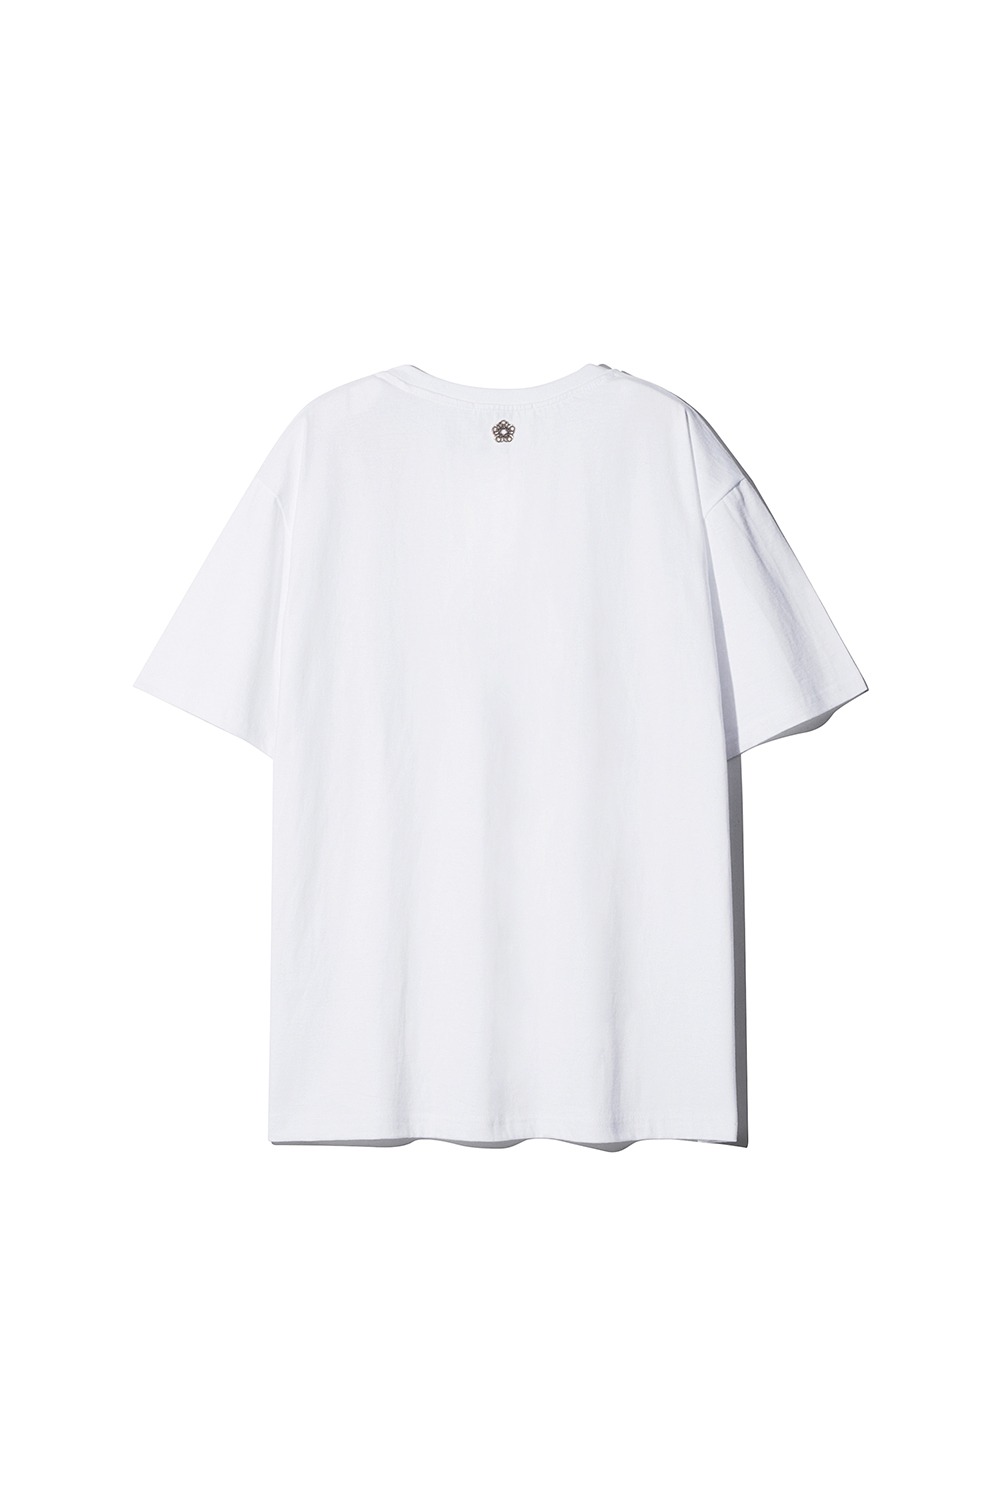 Solid Water Drop Typography T-shirt_White